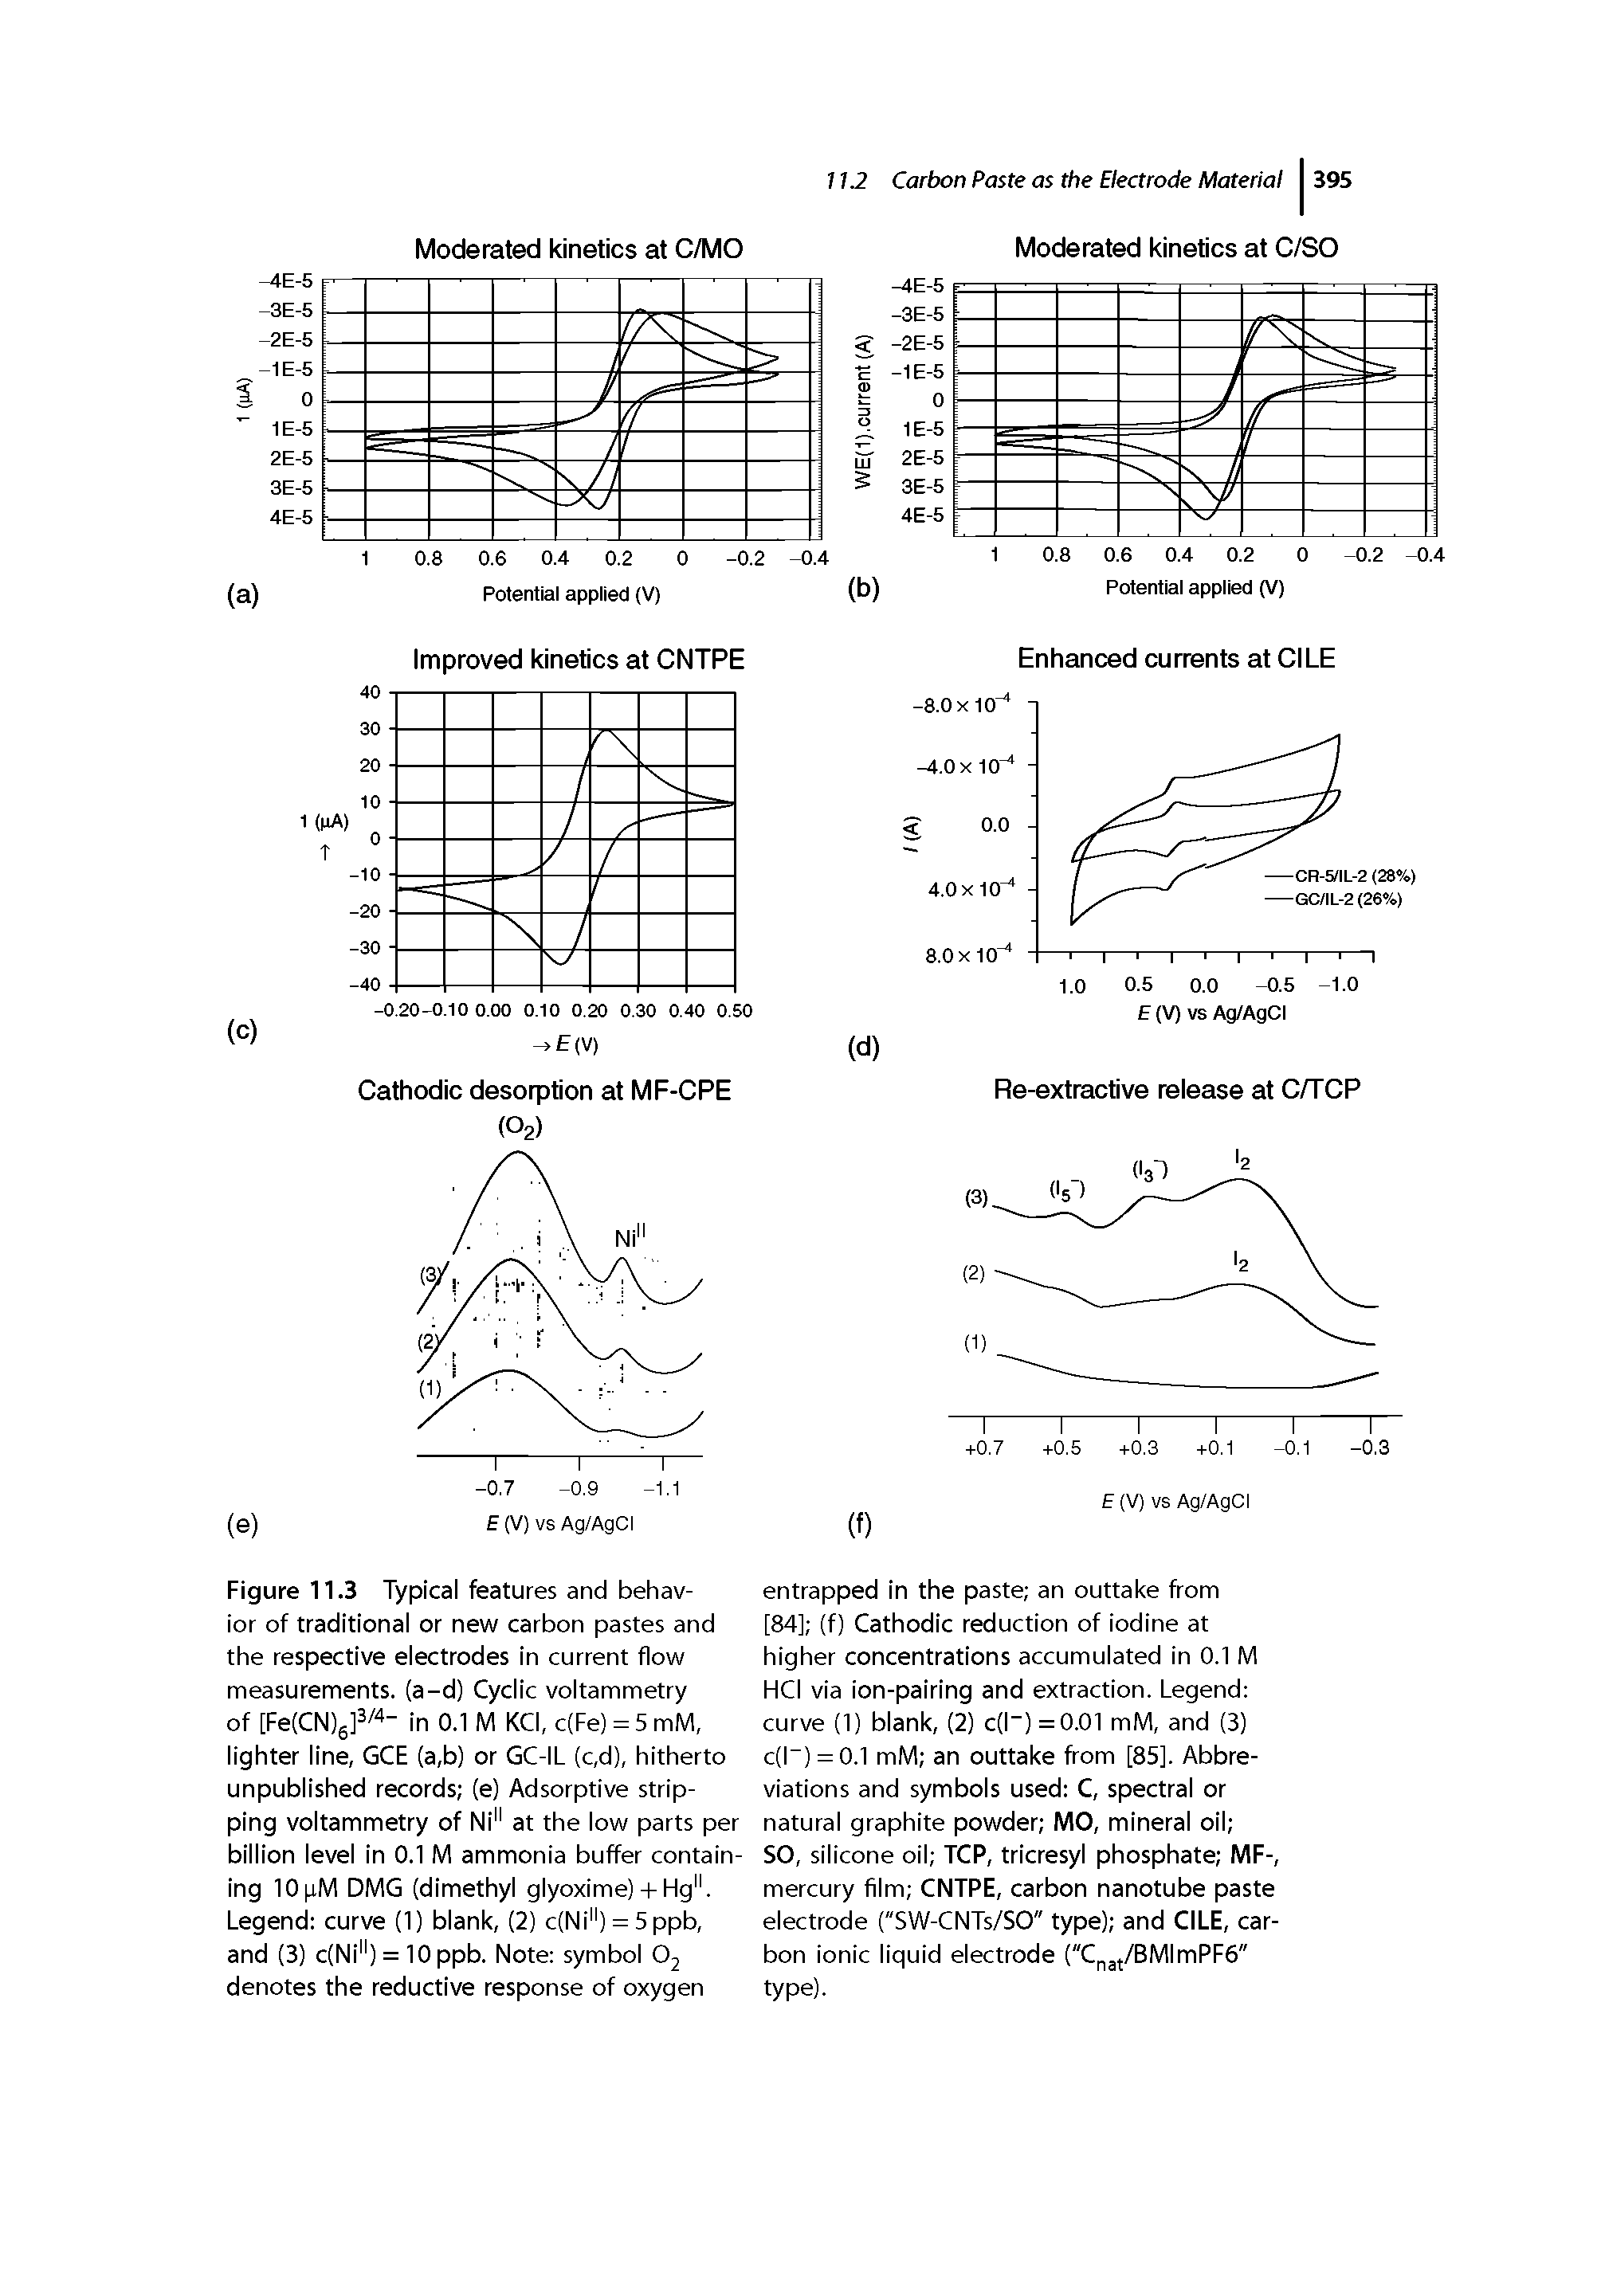 Figure 11.3 Typical features and behavior of traditional or new carbon pastes and the respective electrodes in current flow measurements, (a-d) Cyclic voltammetry of [Fe(CN)g]3/ - in 0.1 M KCI, c(Fe) = 5mM, lighter line, GCE (a,b) or GC-IL (c,d), hitherto unpublished records (e) Adsorptive stripping voltammetry of Ni" at the low parts per billion level in 0.1 M ammonia buffer containing 10 iM DMG (dimethyl glyoxime)H-Hg". Legend curve (1) blank, (2) c(Ni") = 5ppb, and (3) c(Ni") = 10 ppb. Note symbol Oj denotes the reductive response of oxygen...